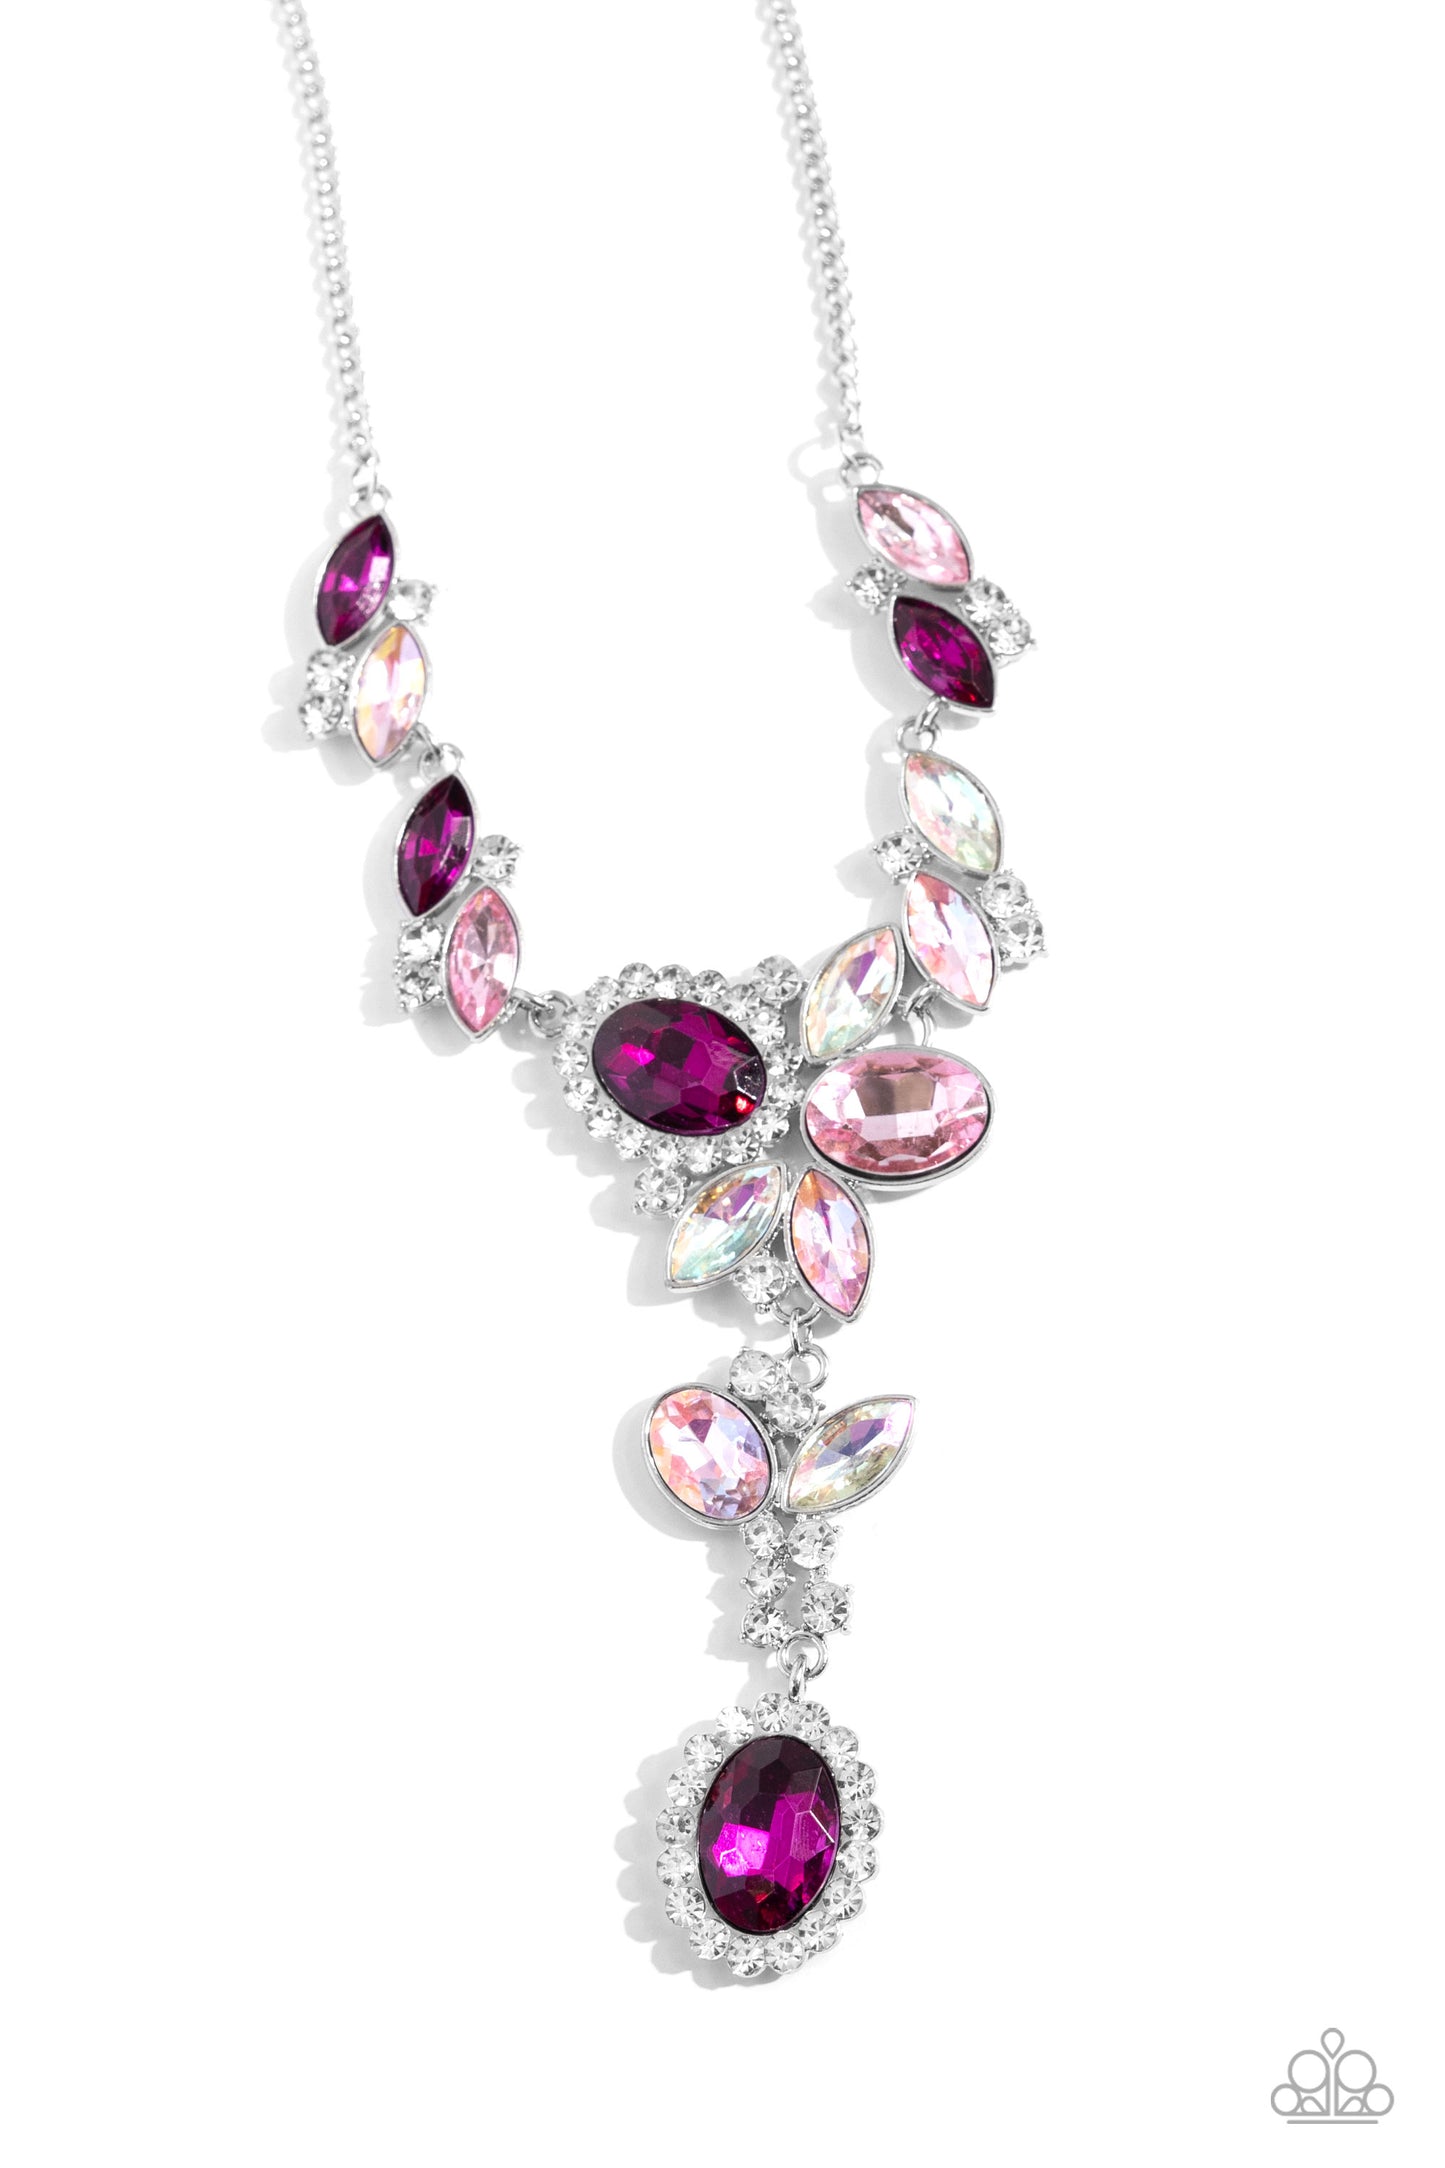 Paparazzi Accessories - Generous Gallery - Pink Necklace featuring an iridescent shimmer, an unexpected explosion of oversized various pink oval and marquise-cut gems cluster into haphazard groupings. Silver-pronged white rhinestones sporadically dot across the abstract canvas and encircle a few iridescent ovals for additional shimmer. The blinding clusters link together, creating a soft statement piece that cascades below the collar. Features an adjustable clasp closure. Due to its prismatic palette